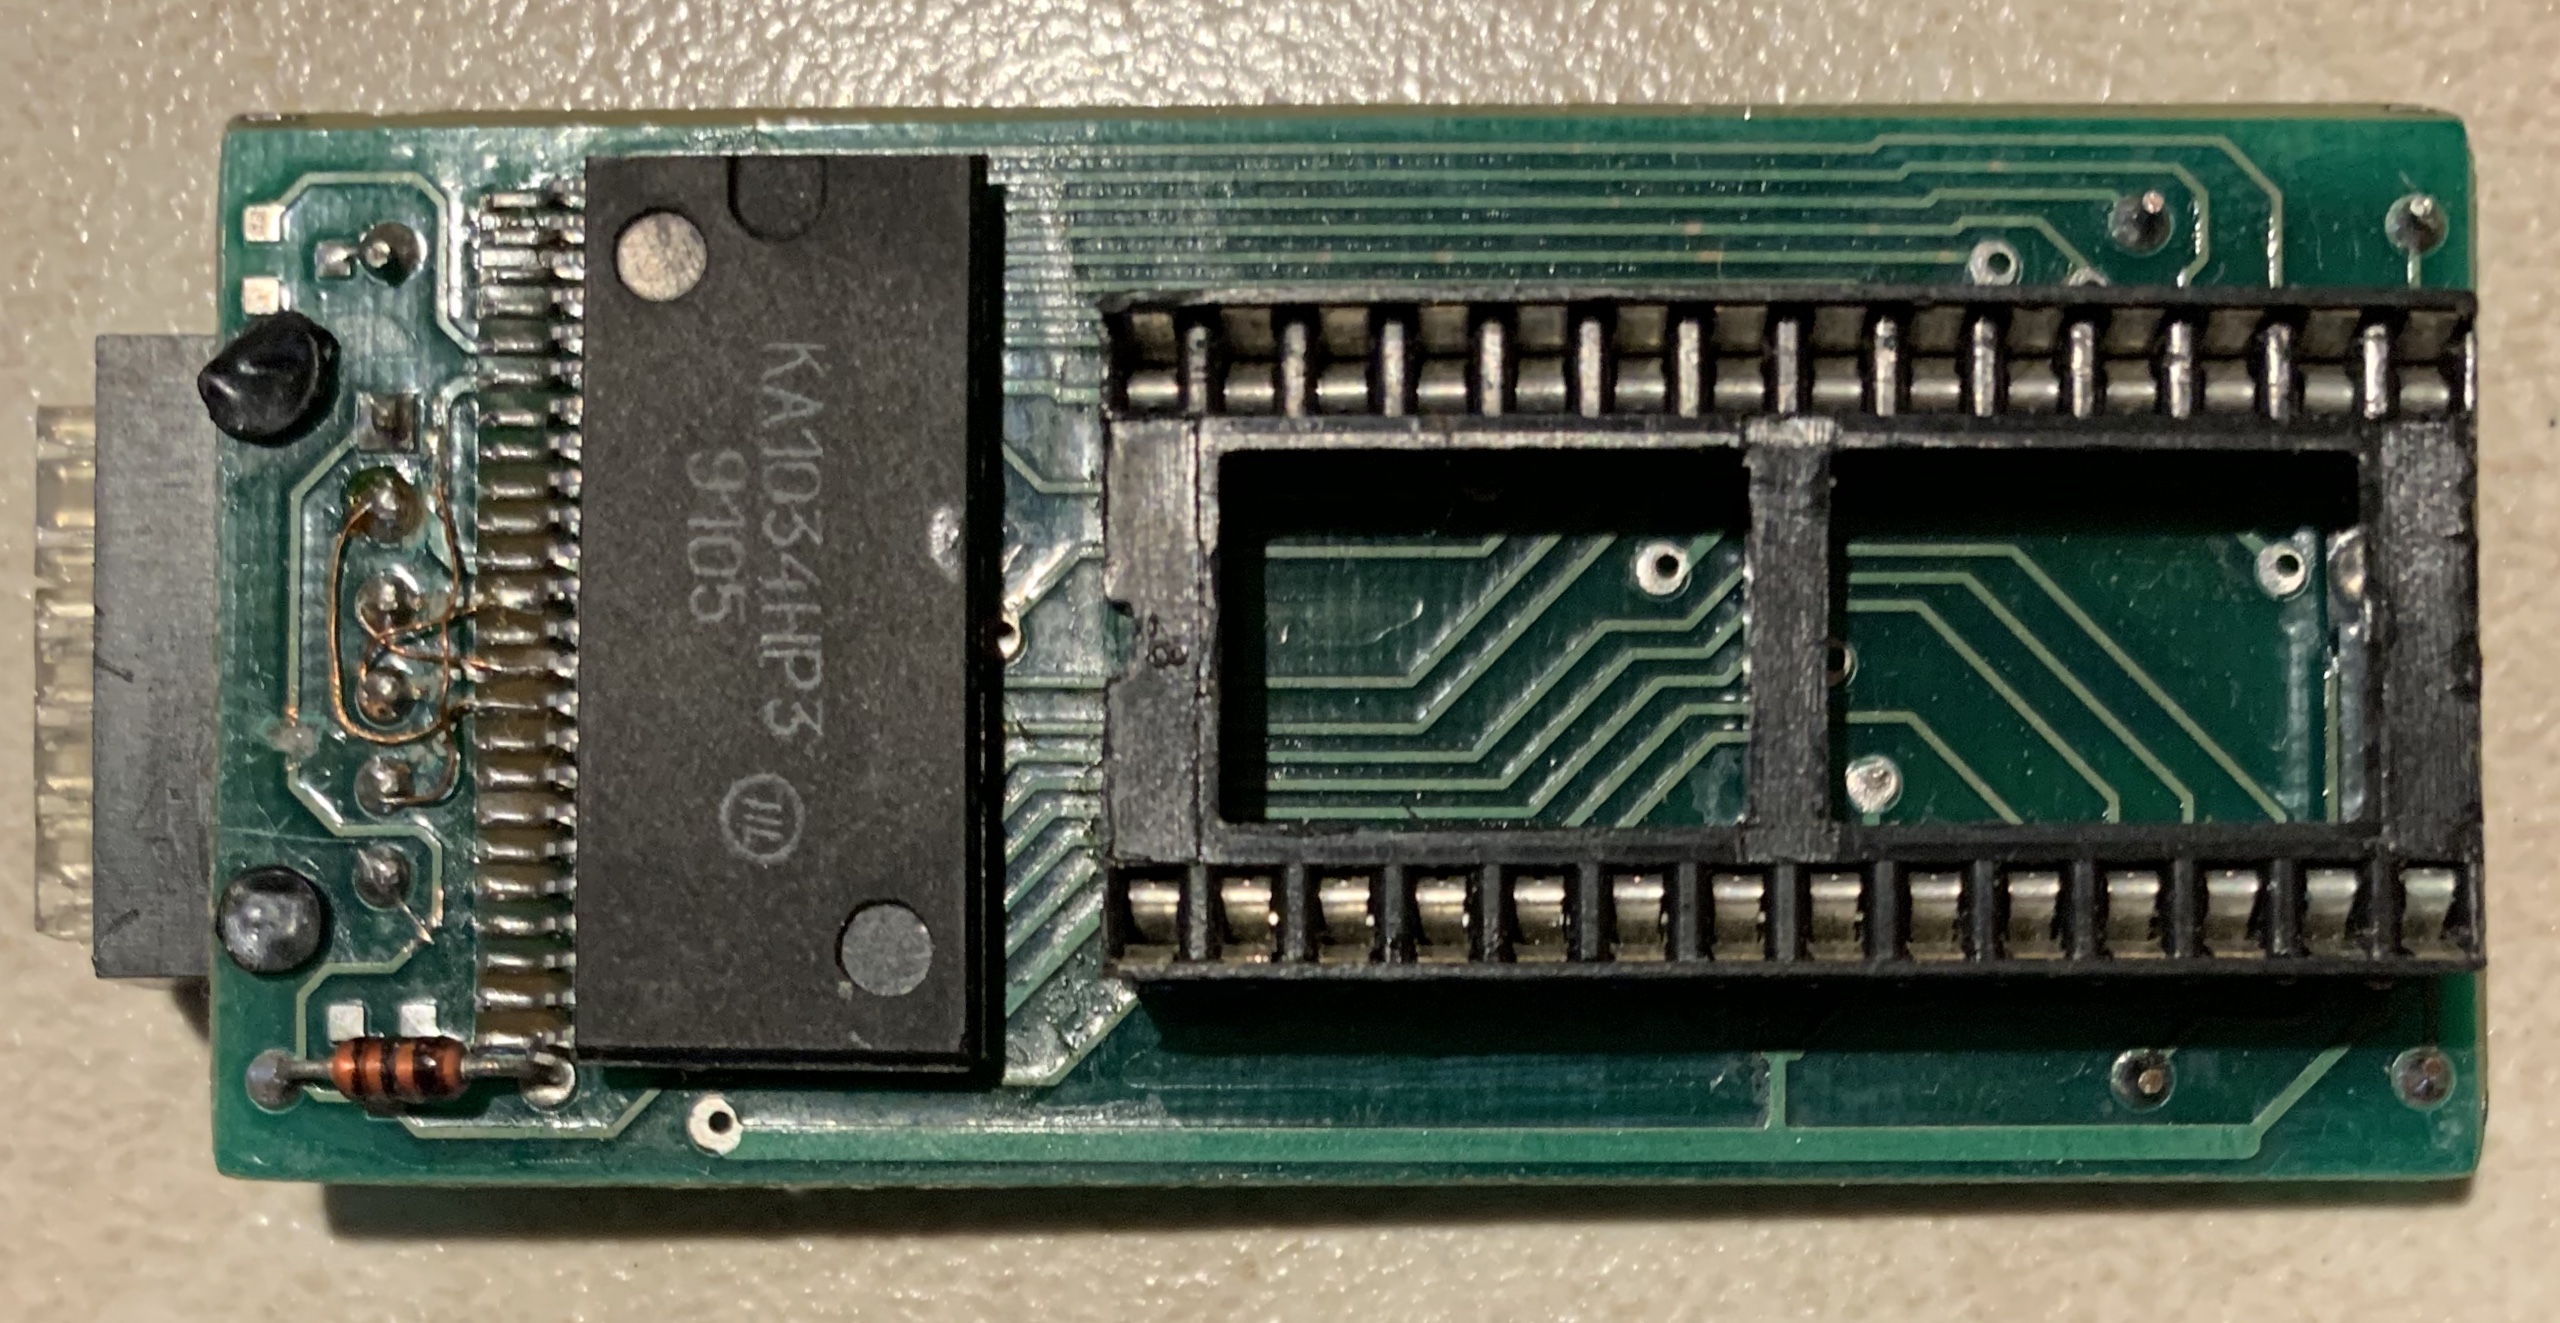 Photograph of the PCB with removed EPROM chip